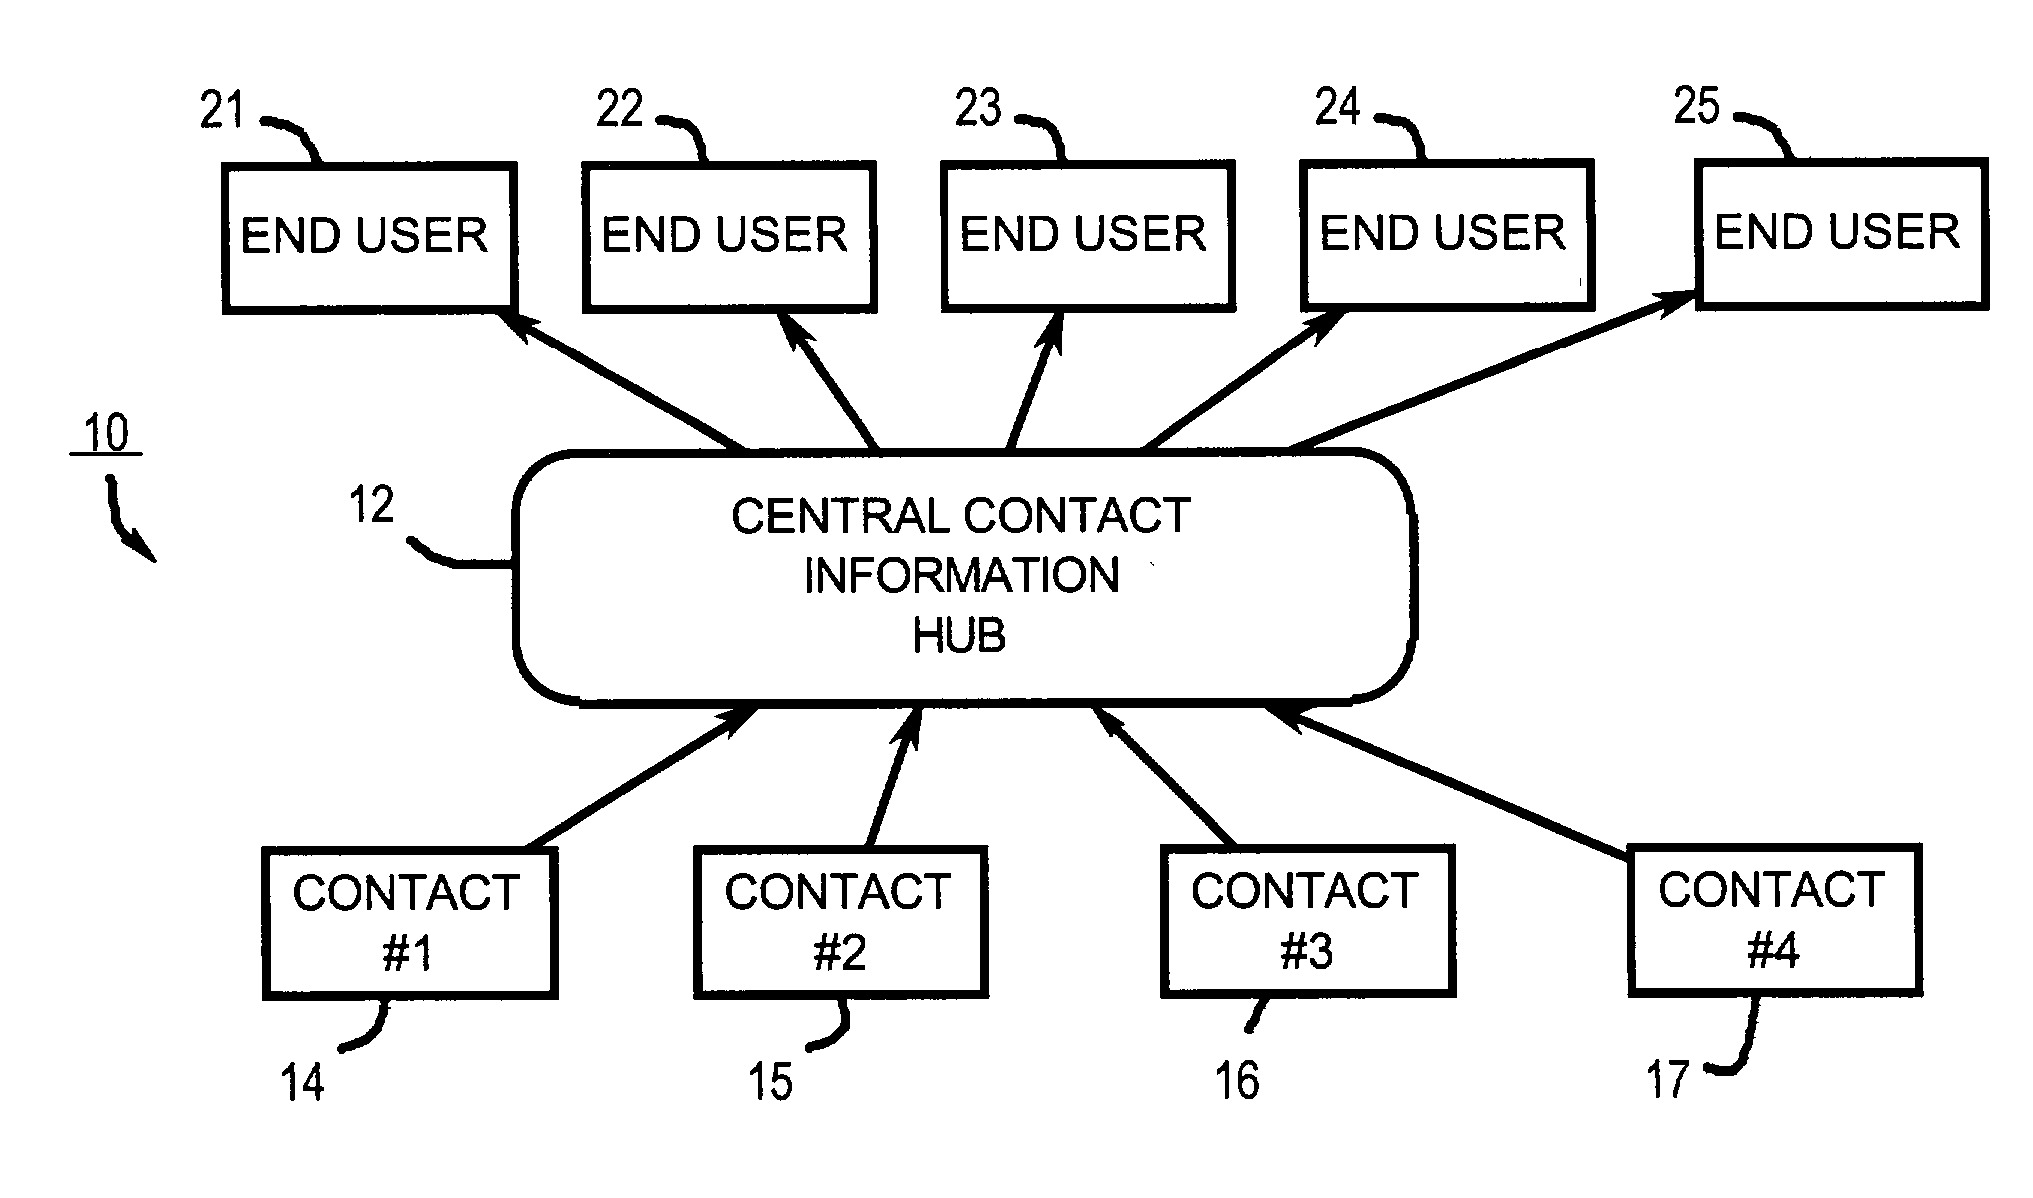 Automated contact information sharing